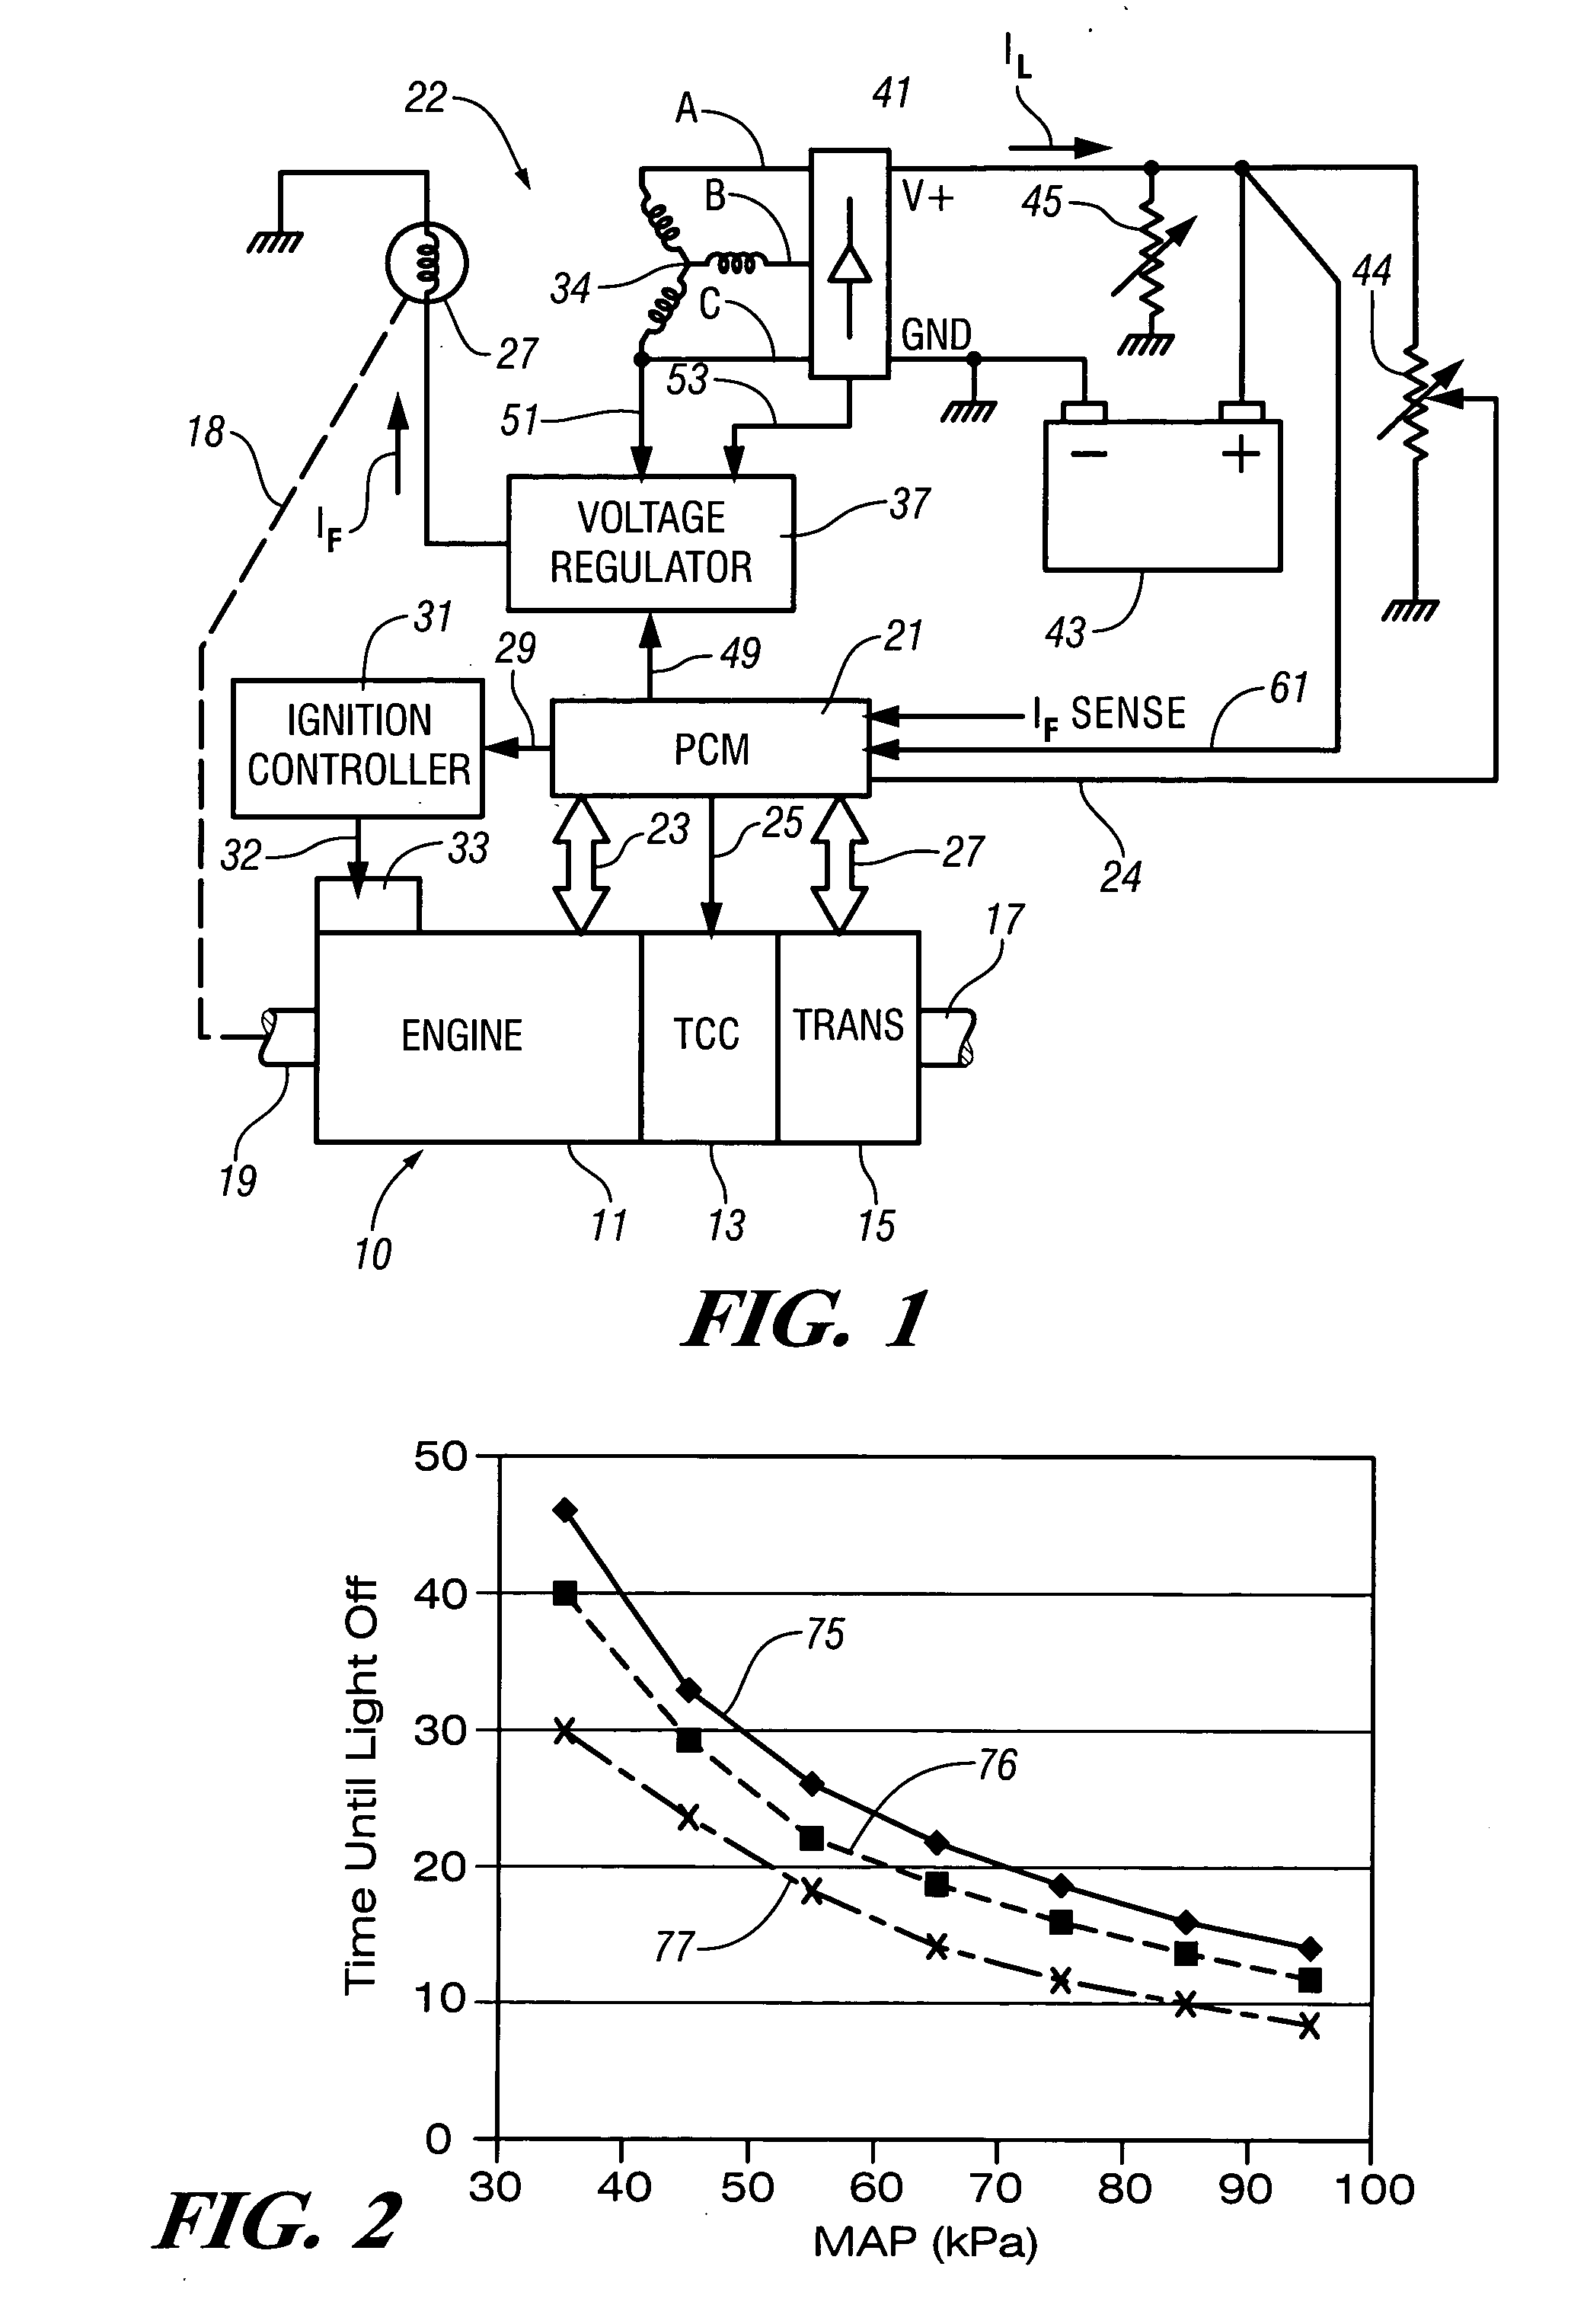 Apparatus and method for accelerated exhaust system component heating